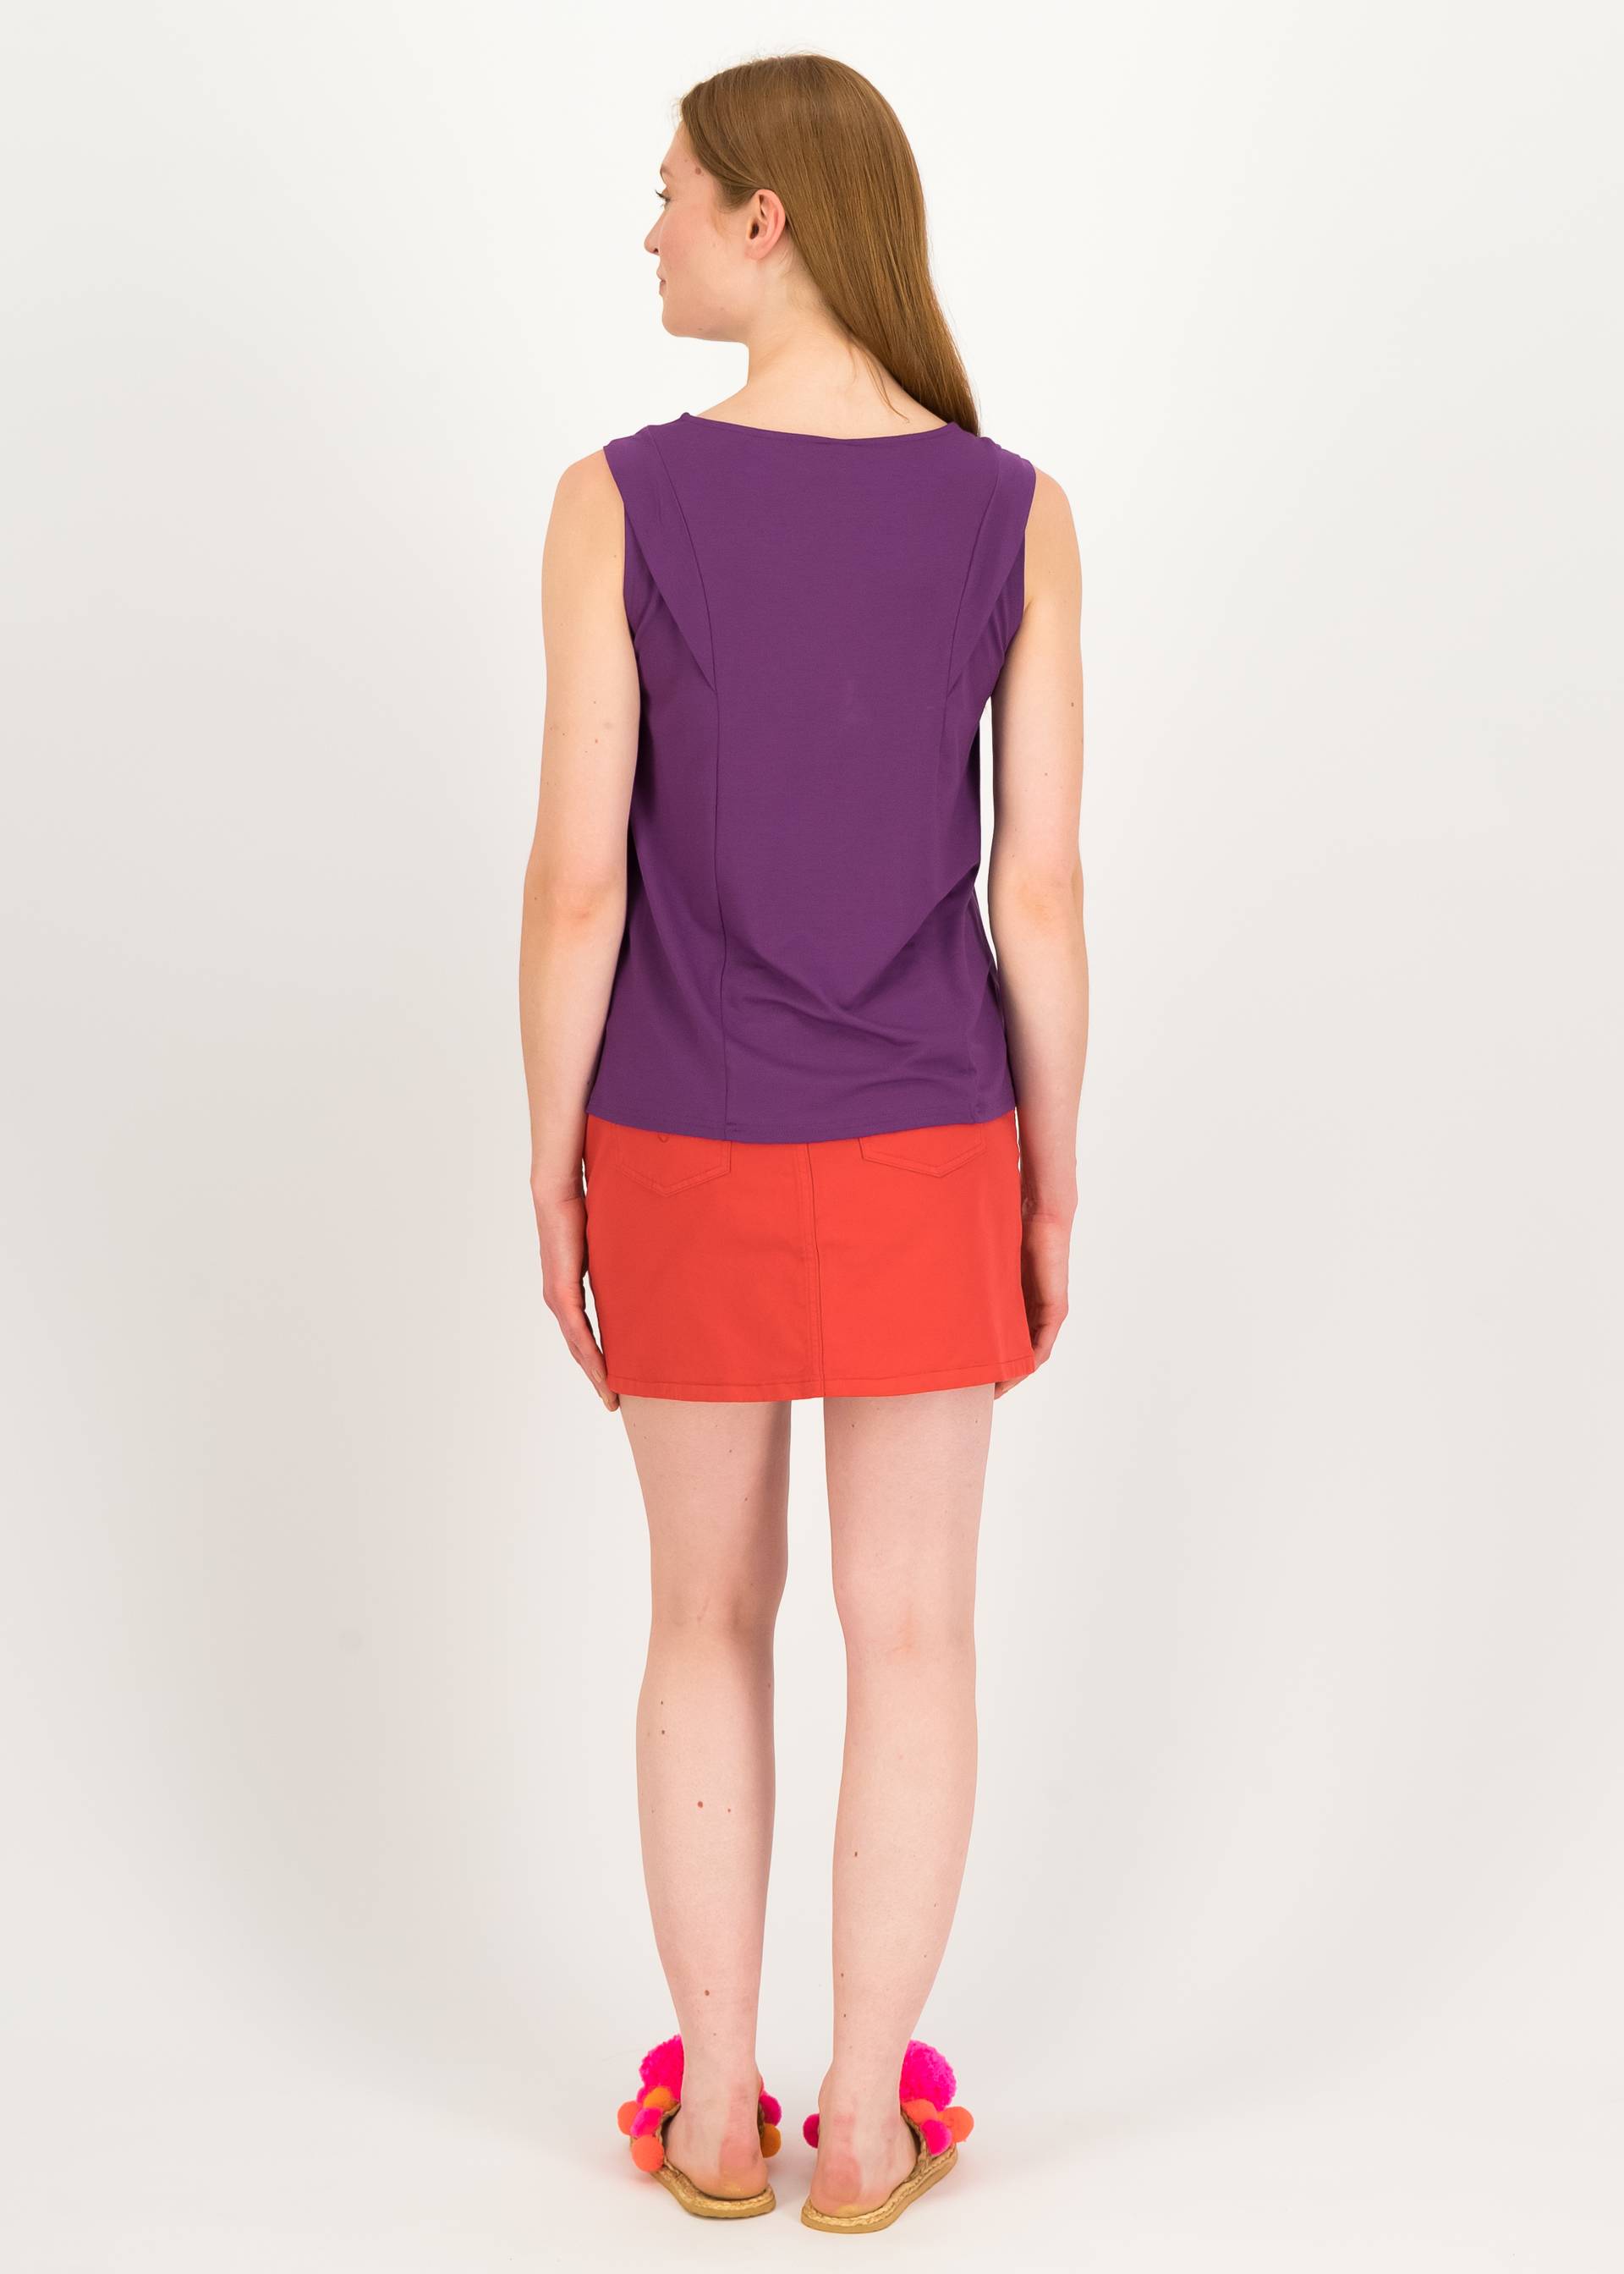 Sleeveless Top Sporty Romance, amour violet, Tops, Purple